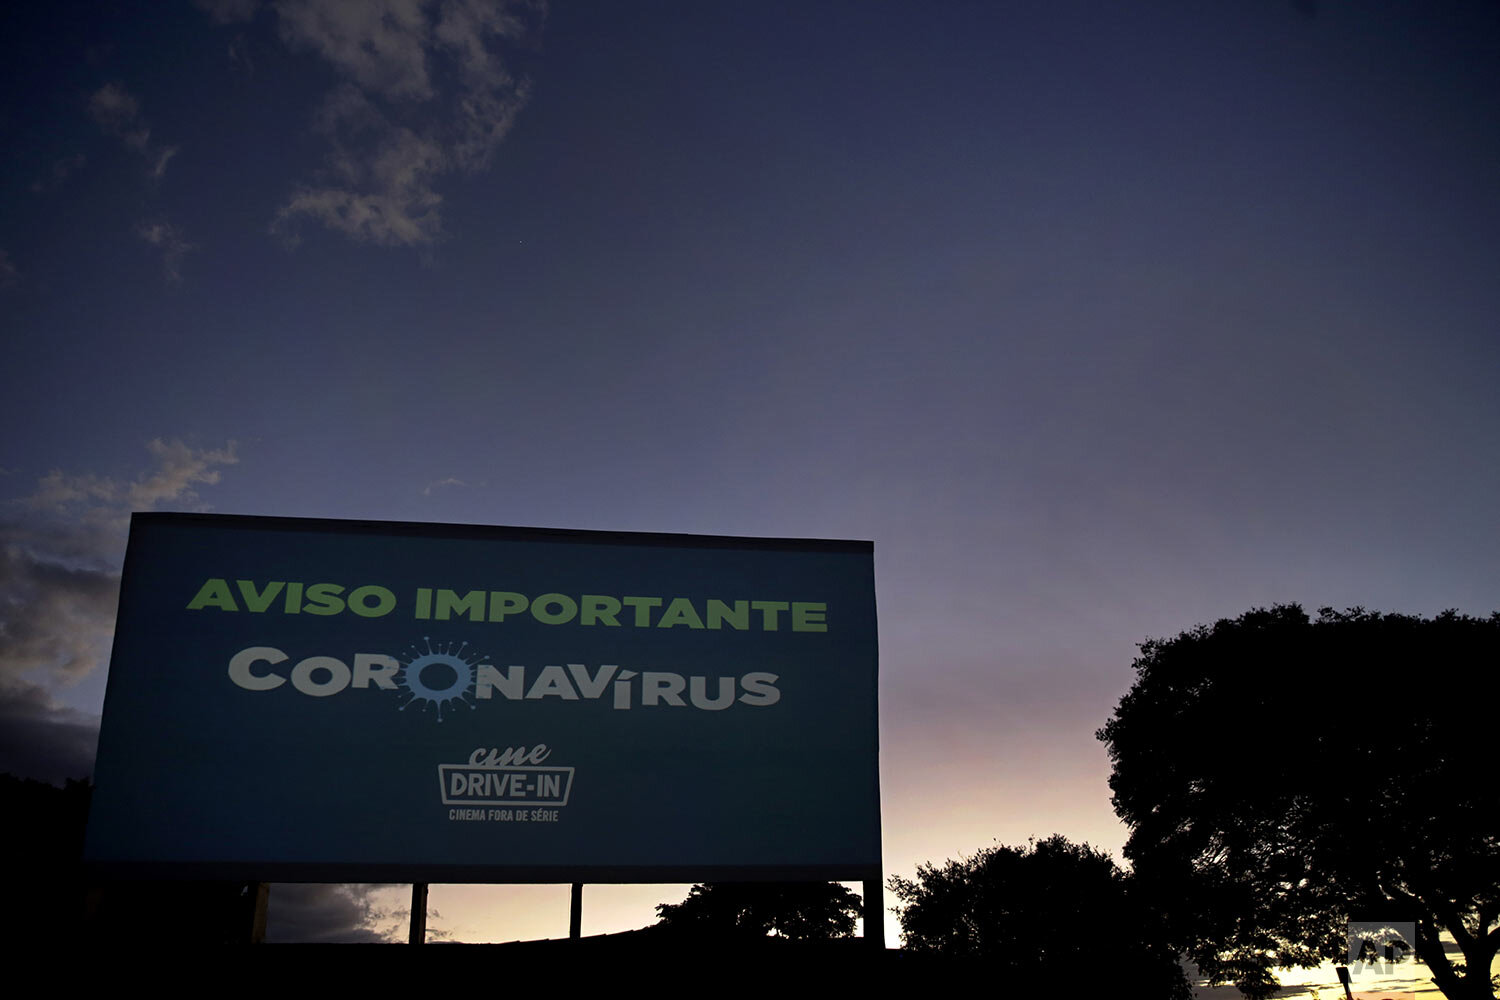  A sign that flashes different warnings about coronavirus, in Portuguese, stands tall at a drive-in movie theater where drivers must leave one space empty between them in Brasilia, Brazil, Saturday, May 23, 2020. (AP Photo/Eraldo Peres) 